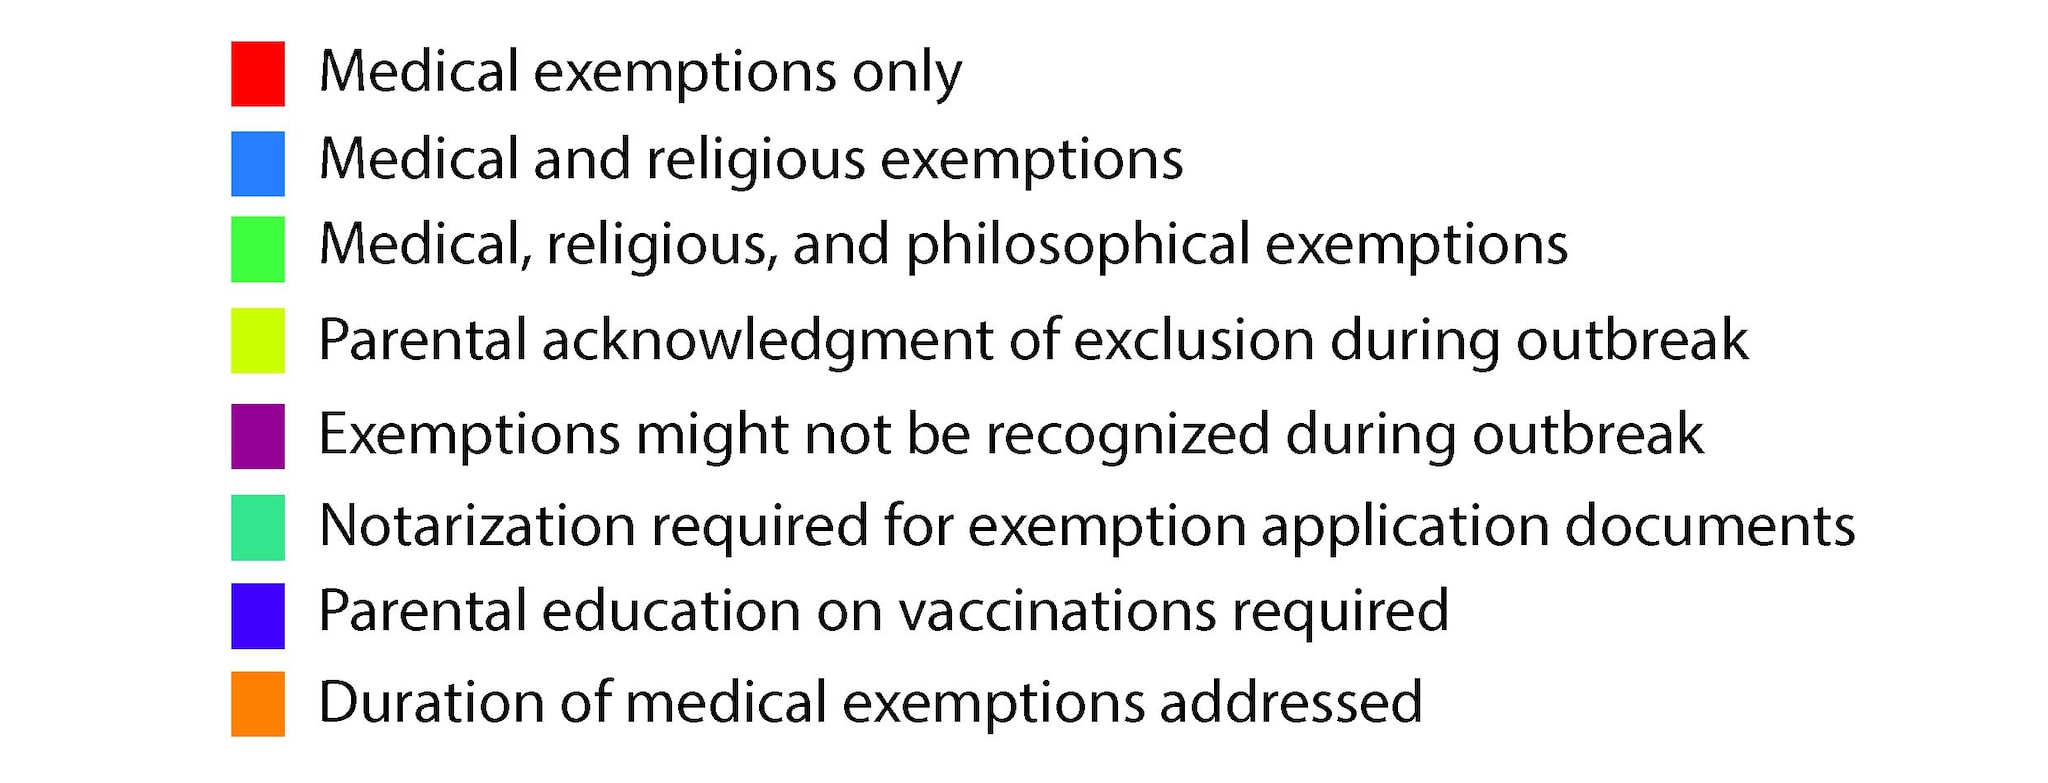 States with laws that permit medical exemptions only: California, Mississippi, New York, and West Virginia. States with laws that permit medical and religious exemptions: Alabama, Alaska, Connecticut, Delaware, Florida, Georgia, Hawaii, Illinois, Indiana, Iowa, Kansas, Kentucky, Maryland, Massachusetts, Missouri, Montana, Nebraska, Nevada, New Hampshire, New Jersey, New Mexico, North Carolina, Rhode Island, South Carolina, South Dakota, Tennessee, Vermont, Virginia, and Wyoming. States with laws that permit medical, religious, and philosophical exemptions: Arizona, Arkansas, Colorado, Idaho, Louisiana, Maine, Michigan, Minnesota, North Dakota, Ohio, Oklahoma, Oregon, Pennsylvania, Texas, Utah, Washington, and Wisconsin. States with laws that require parental acknowledgment during the exemption application process that exempted students can be excluded from school during outbreaks: Alaska, Arizona, Arkansas, Connecticut, Delaware, Georgia, Idaho, Illinois, Indiana, Iowa, Kentucky, Louisiana, Michigan, Minnesota, Missouri, Montana, New Hampshire, New Mexico, North Dakota, Ohio, Oklahoma, Oregon, Rhode Island, Utah, Vermont, Virginia, Washington, Wisconsin, and Wyoming. States with laws that establish that some exemptions might not be recognized in the event of an outbreak: Alabama, Colorado, Georgia, Hawaii, Iowa, Kentucky, Maryland, Massachusetts, Nevada, North Dakota, Tennessee, and Virginia. States with laws that require notarization of documents in the exemption application process: Alaska, Arkansas, Connecticut, Delaware, Georgia, Iowa, Kentucky, Minnesota, Montana, Nebraska, Nevada, New Hampshire, New Mexico, South Carolina, Texas, and Virginia. States with laws that require parental education on vaccinations in the exemption application process: Arizona, Arkansas, Illinois, Michigan, Oregon, Rhode Island, Utah, Vermont, and Washington. States with laws that expressly address the duration of medical exemptions (e.g., temporary or permanent): Arizona, Arkansas, California, Colorado, Connecticut, Delaware, Florida, Georgia, Hawaii, Idaho, Illinois, Indiana, Iowa, Kansas, Kentucky, Maine, Maryland, Michigan, Mississippi, Missouri, Montana, Nevada, New Hampshire, New Jersey, New Mexico, New York, North Carolina, North Dakota, Oregon Pennsylvania, South Carolina, Texas, Utah, Vermont, Virginia, Washington, and West Virginia.